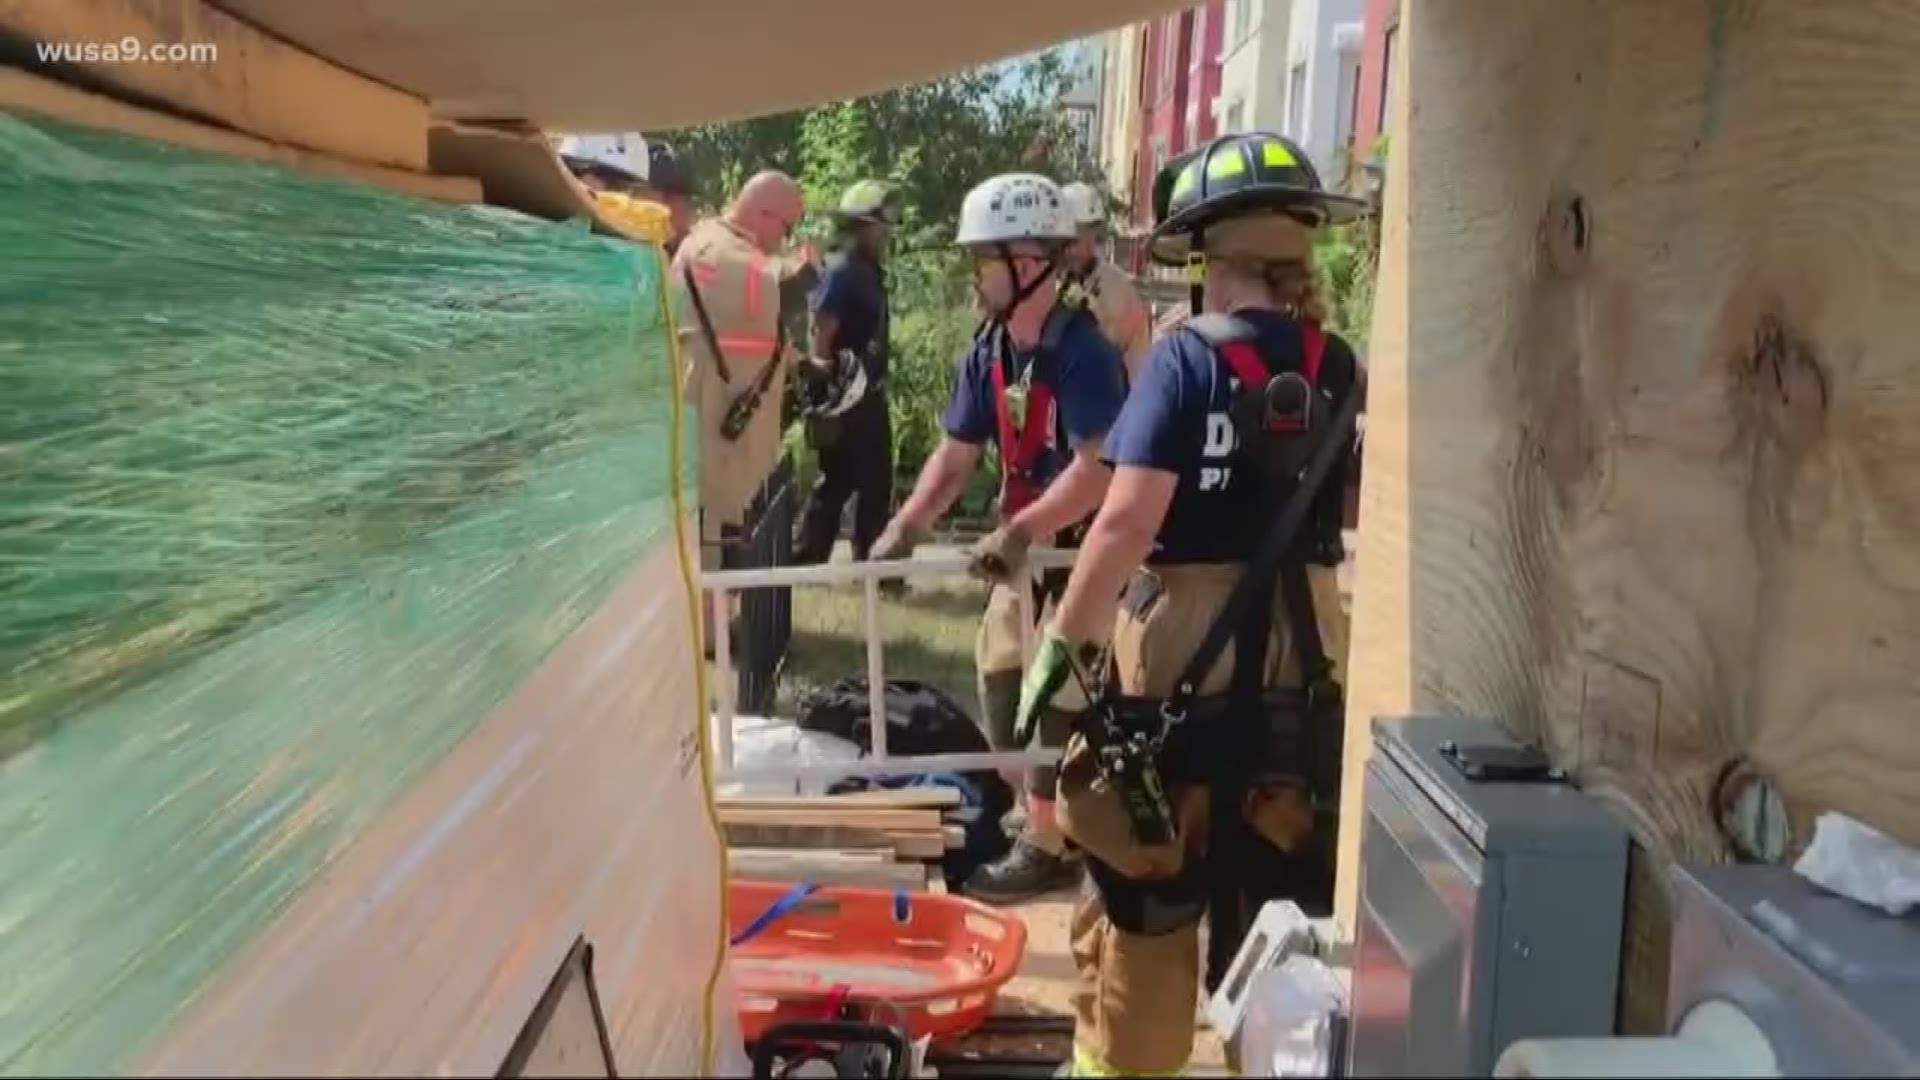 A worker's leg was trapped in a trench in the 3500 of 11th street, Northwest. Crews with the D.C. fire department were called to the scene and shored up the trench for the rescue operation. It took them about an hour to free him.